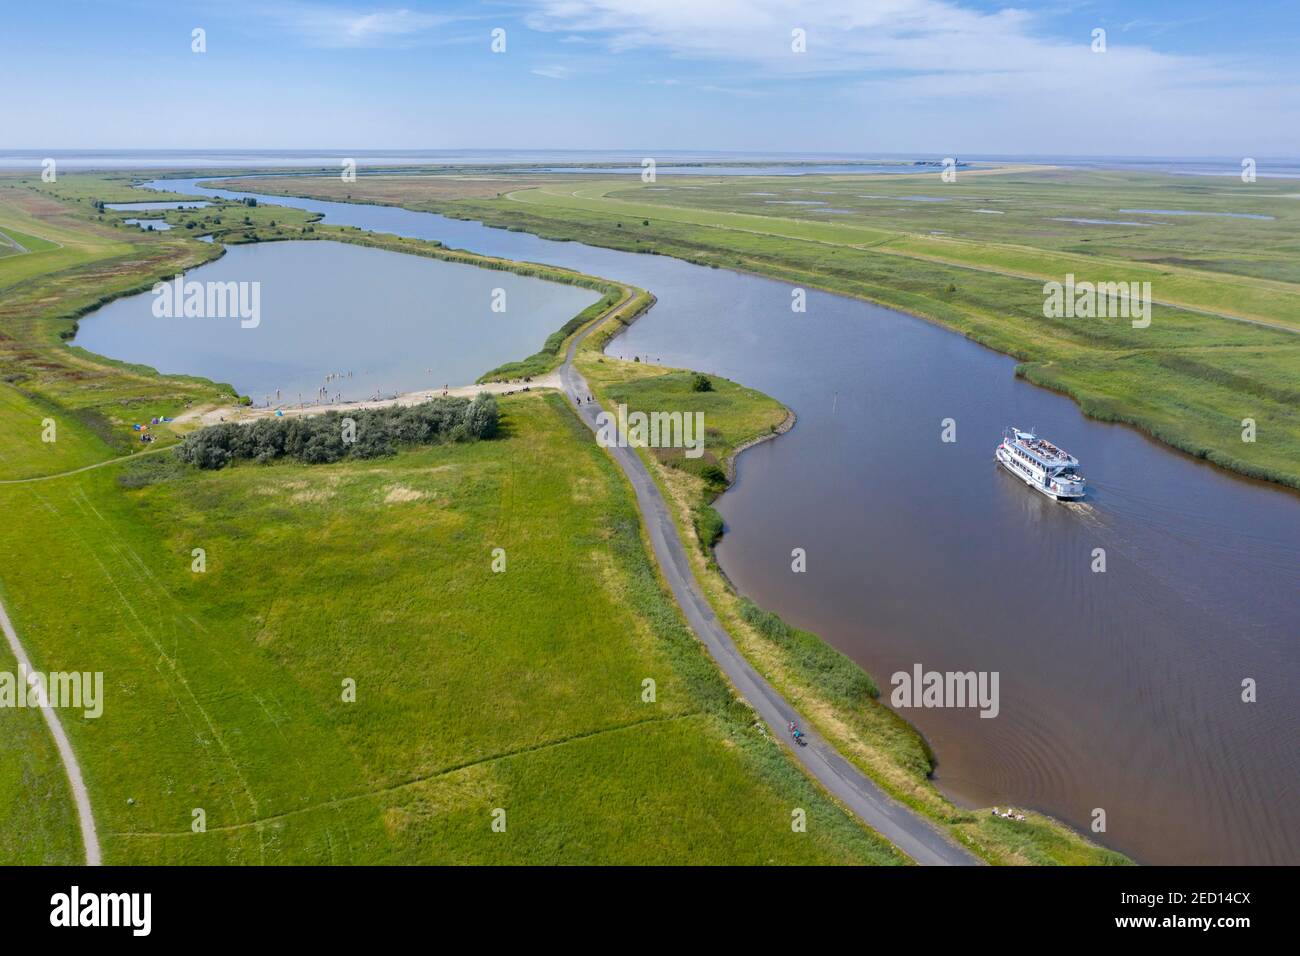 Drone shot with landscape at the Leyhoerner-Sieltief and tourist ship, Greetsiel, Lower Saxony, Germany Stock Photo